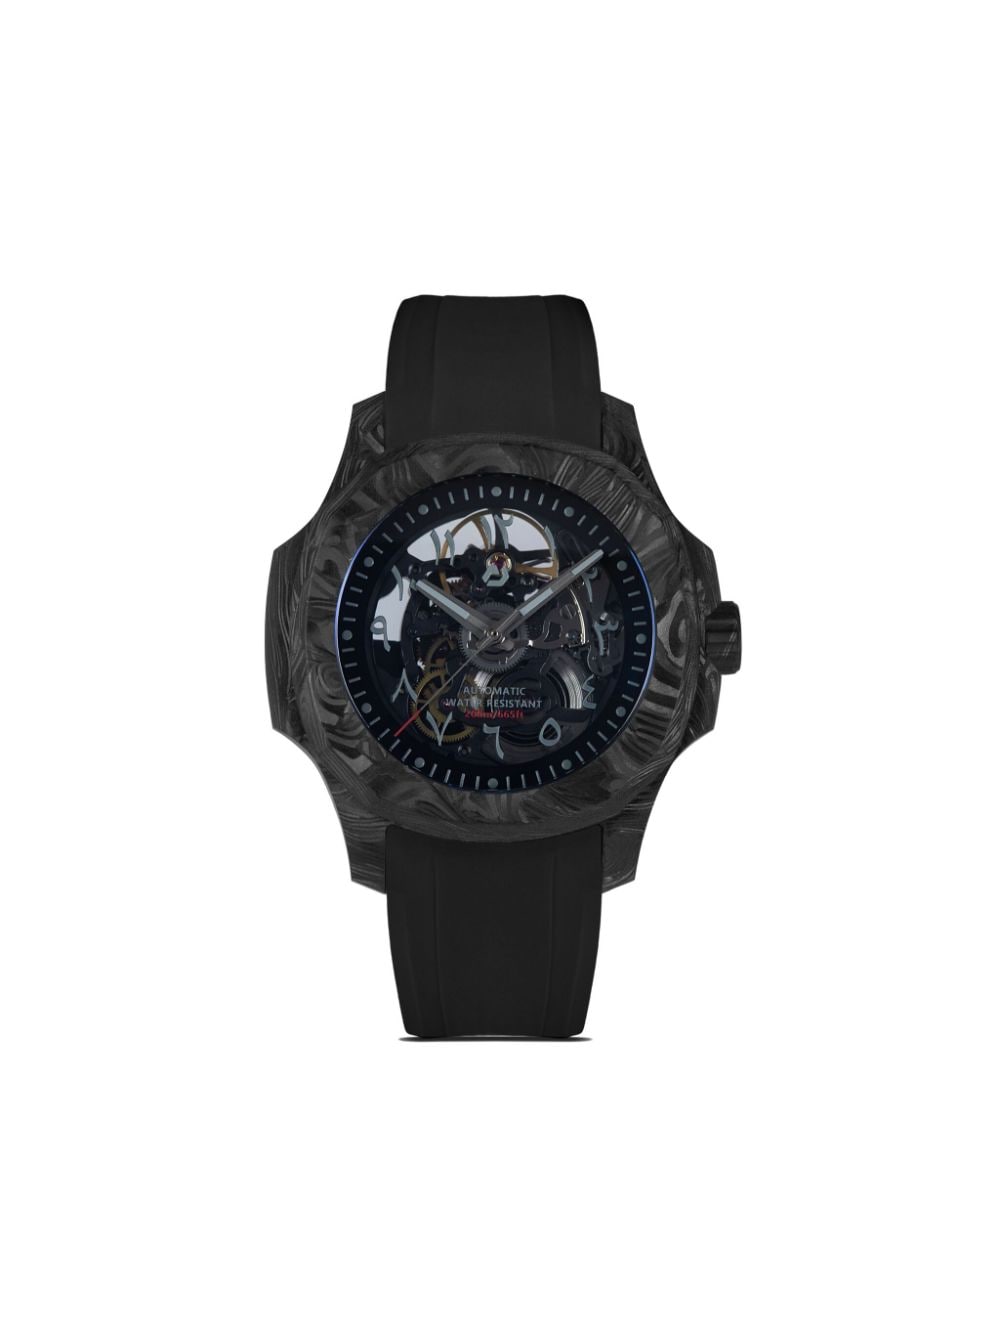 Nuun Official N200 The Wrong Wrist Edition 46毫米腕表 In Black